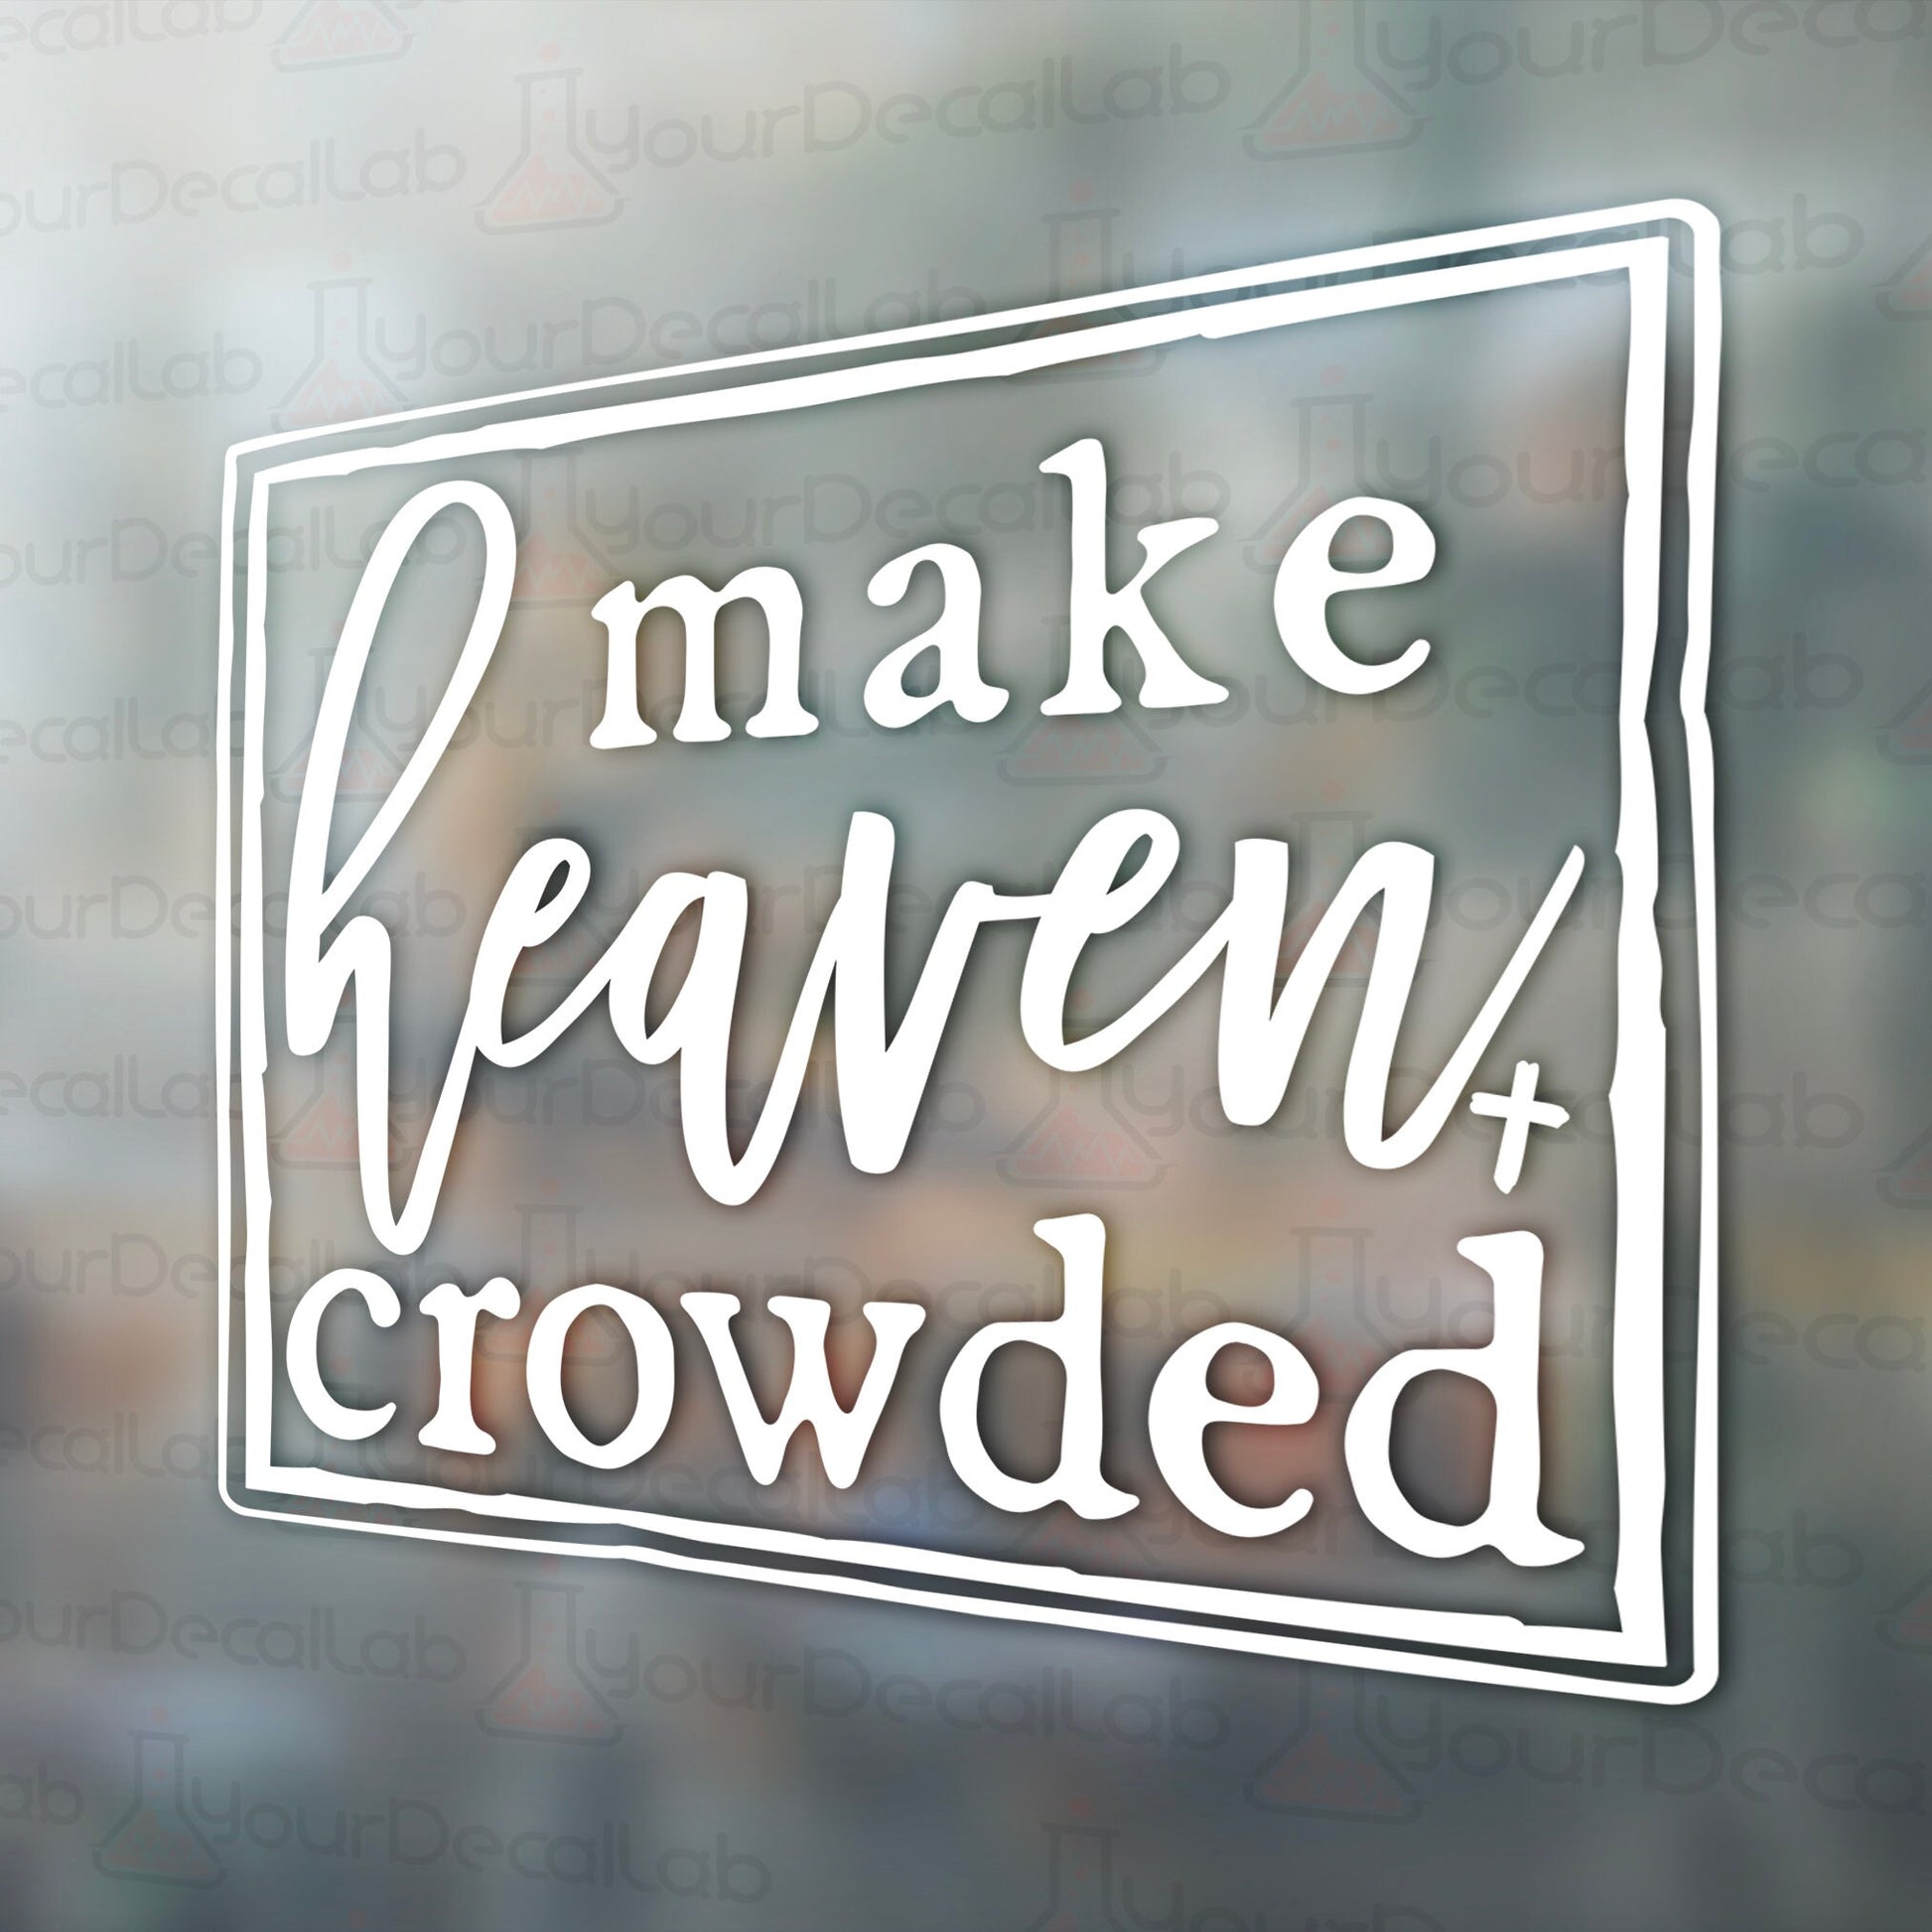 a sticker that says make heaven crowded